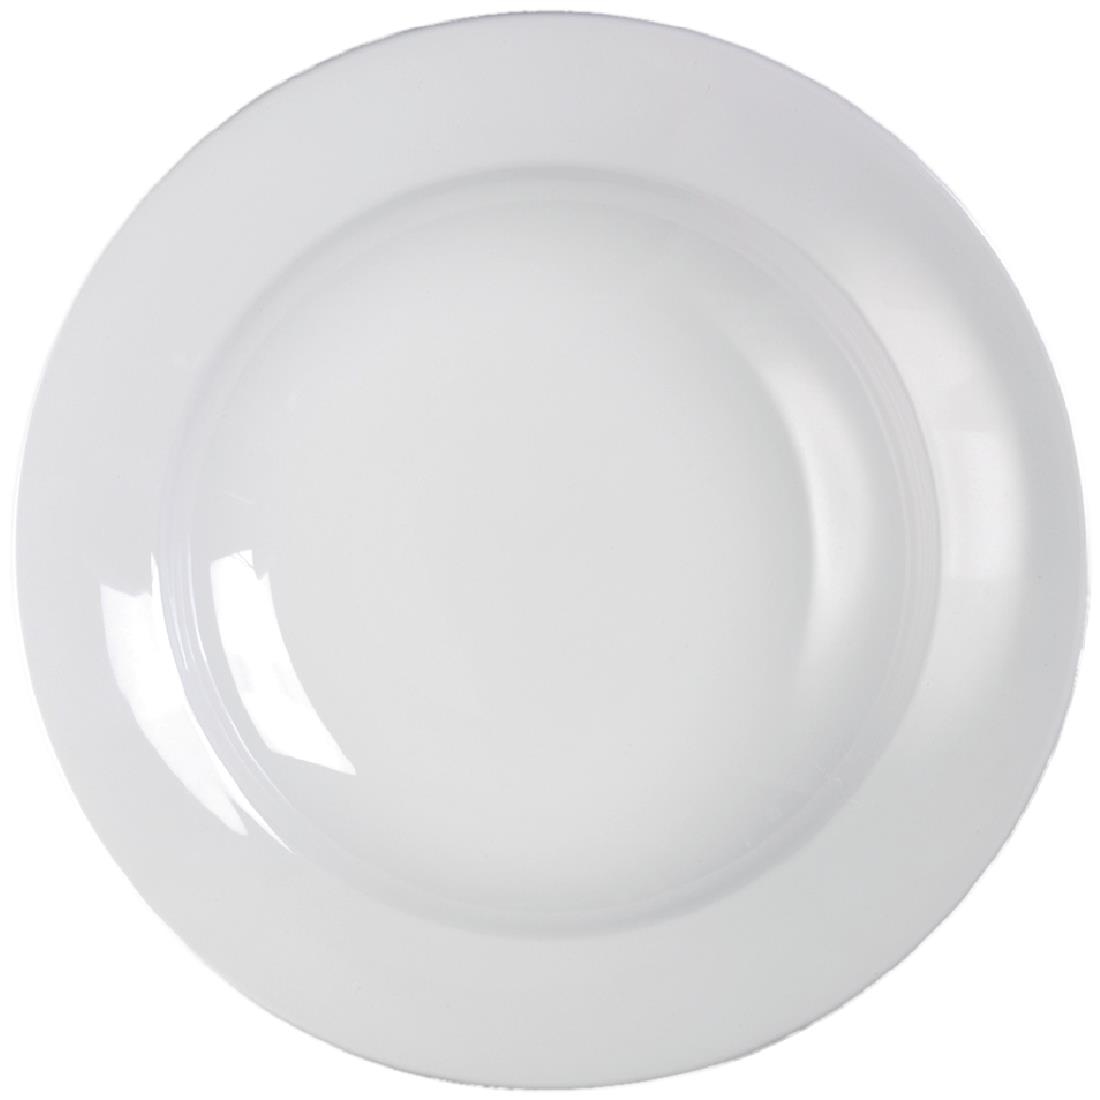 Churchill Profile Pasta Plates 305mm (Pack of 12)